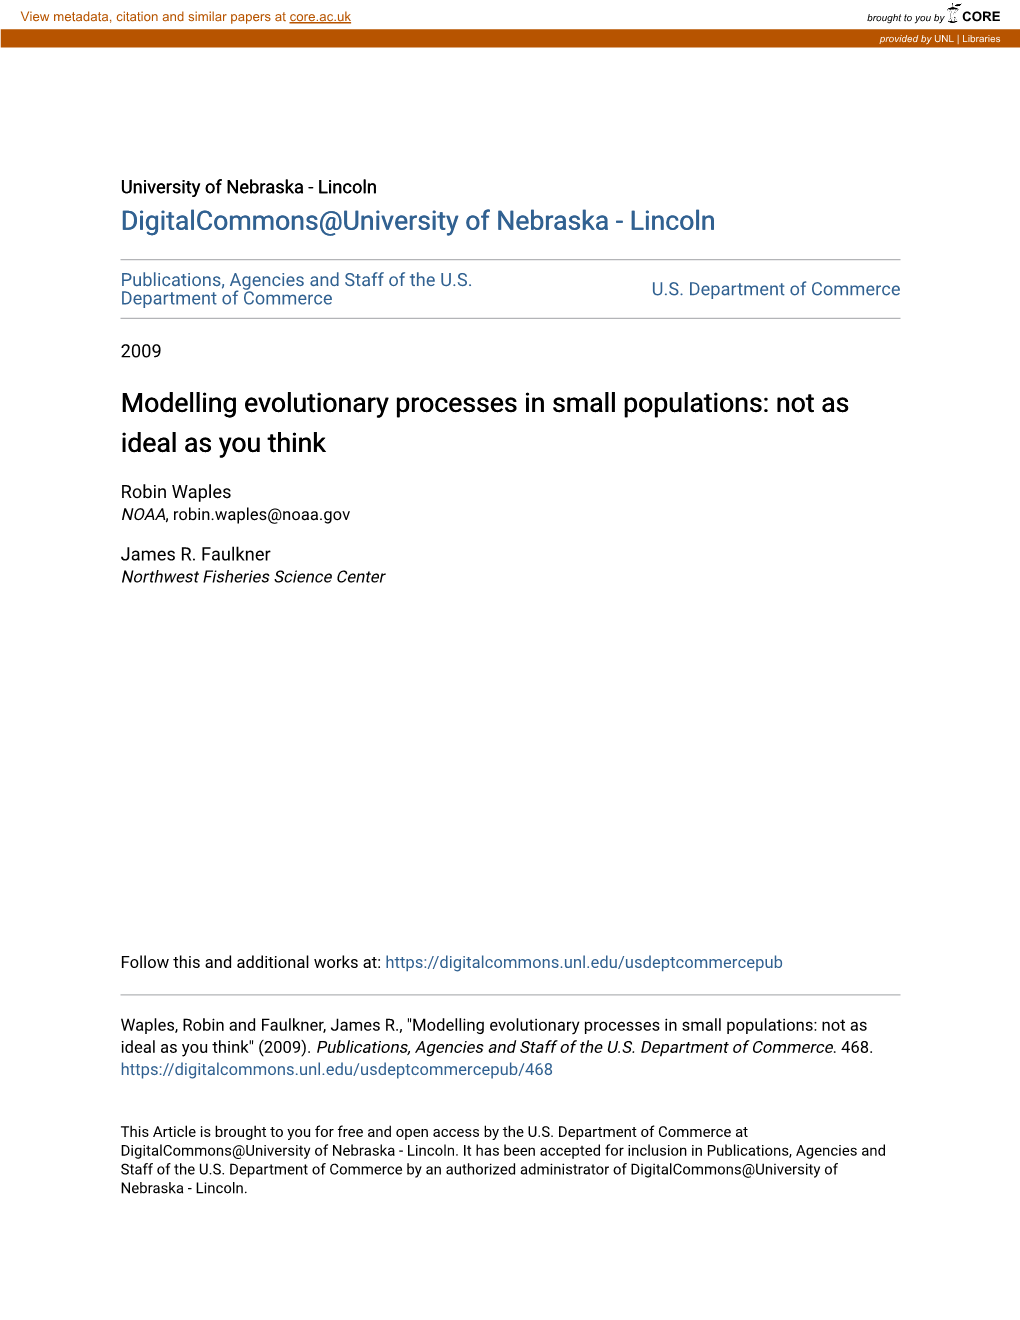 Modelling Evolutionary Processes in Small Populations: Not As Ideal As You Think